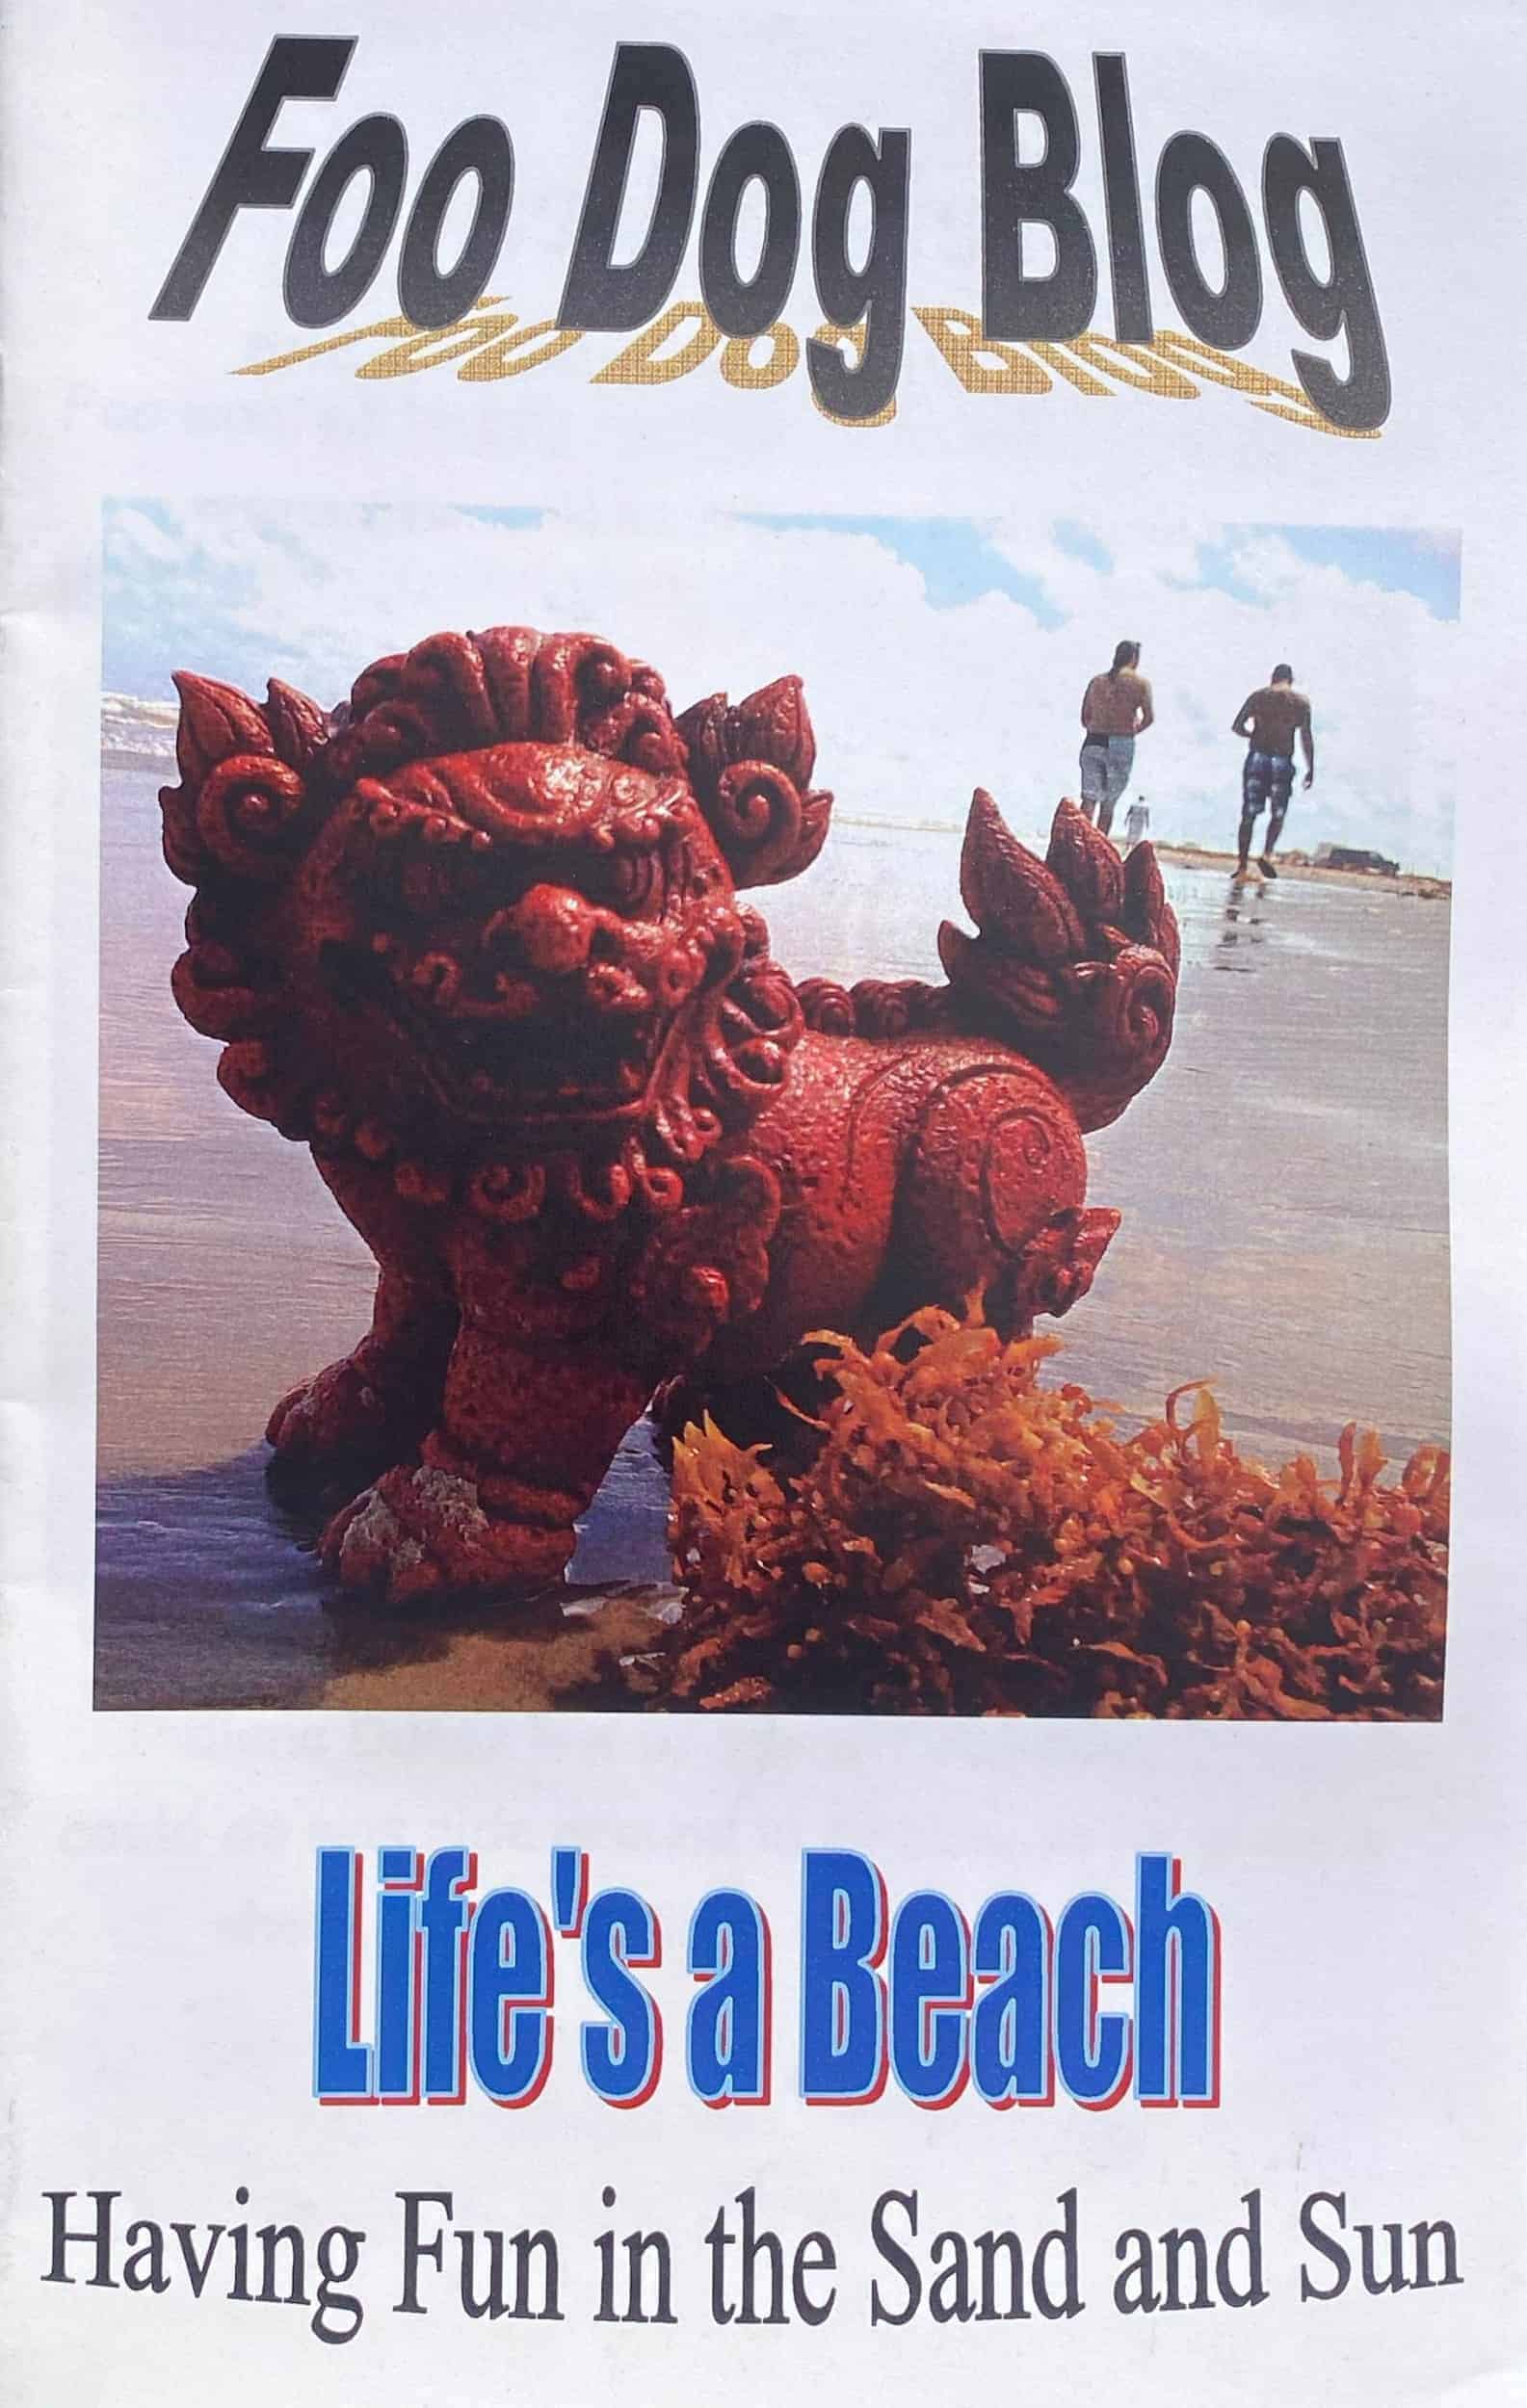 This Life's a Beach: Having Fun in the Sand and Sun (Foo Dog Blog Mini Book) is made with love by Victoria J. Hyla/Victoria Hyla Maldonado! Shop more unique gift ideas today with Spots Initiatives, the best way to support creators.